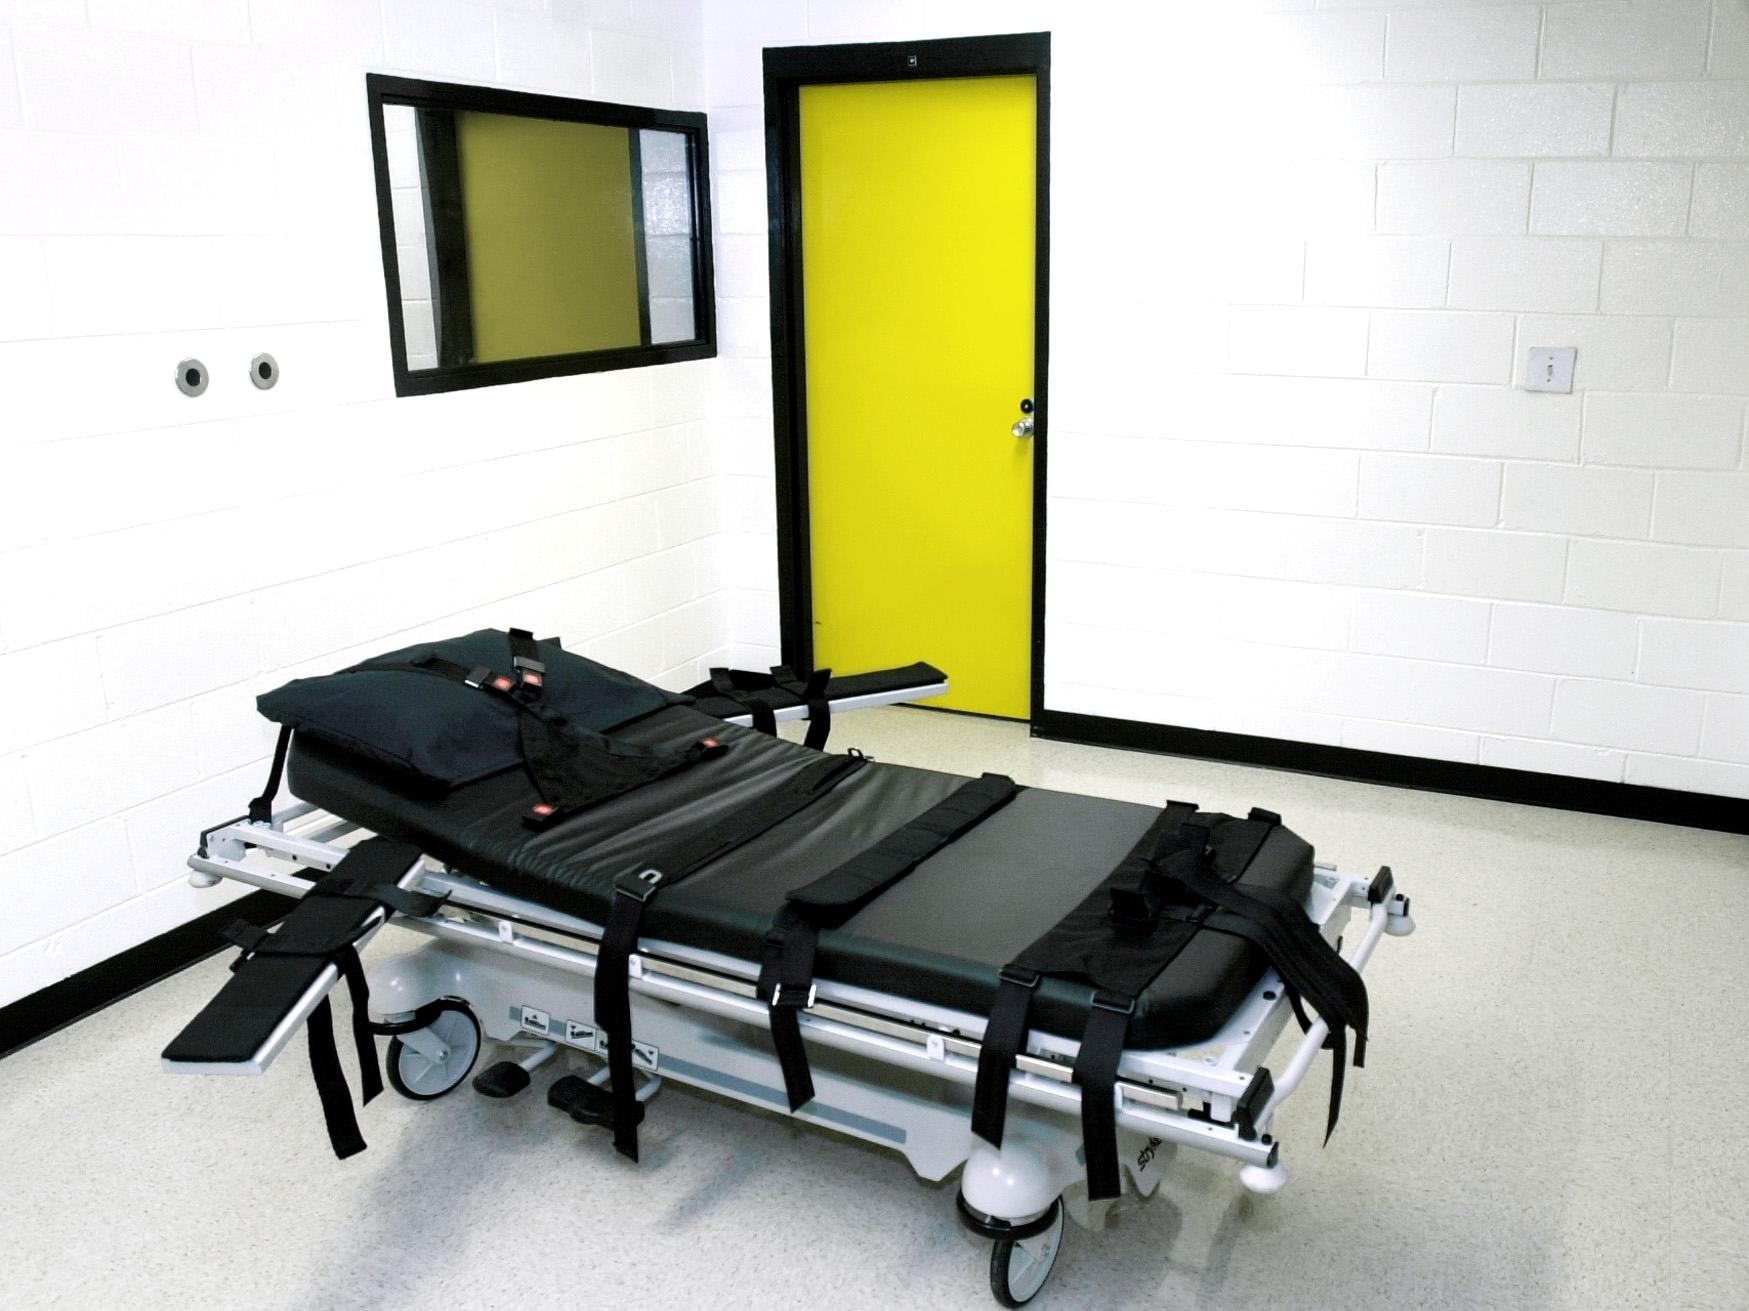 Where Do Drugs For Lethal Injections Come From Few Know Kuow News